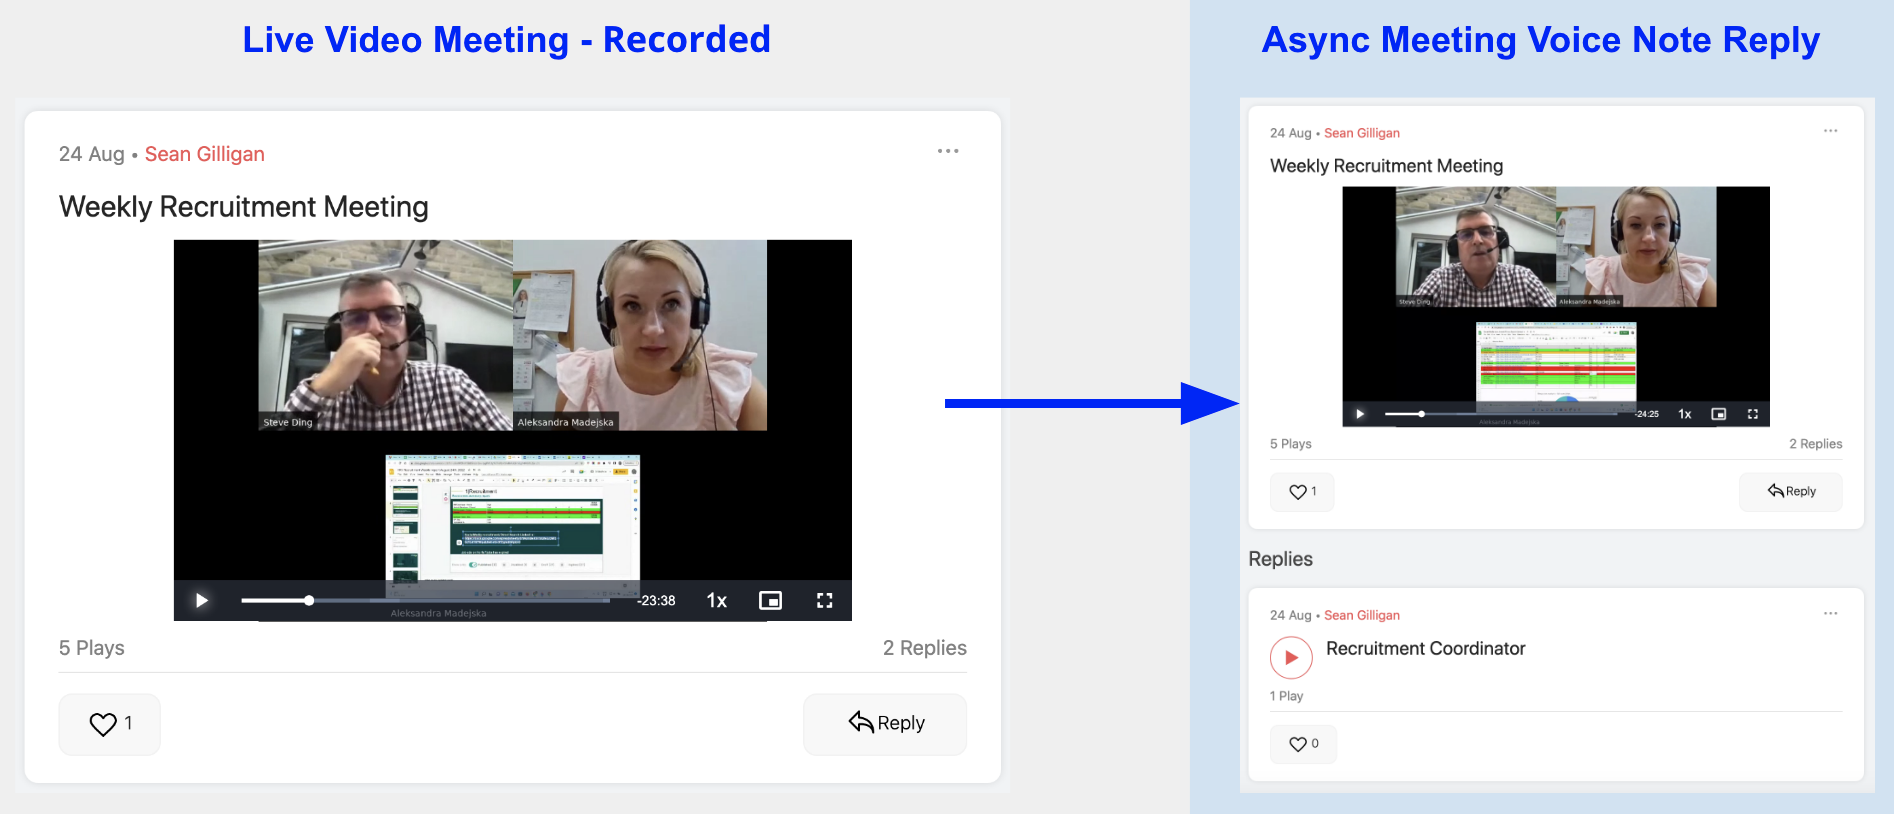 Async Meeting to Live Video Meeting to Async Meeting Again